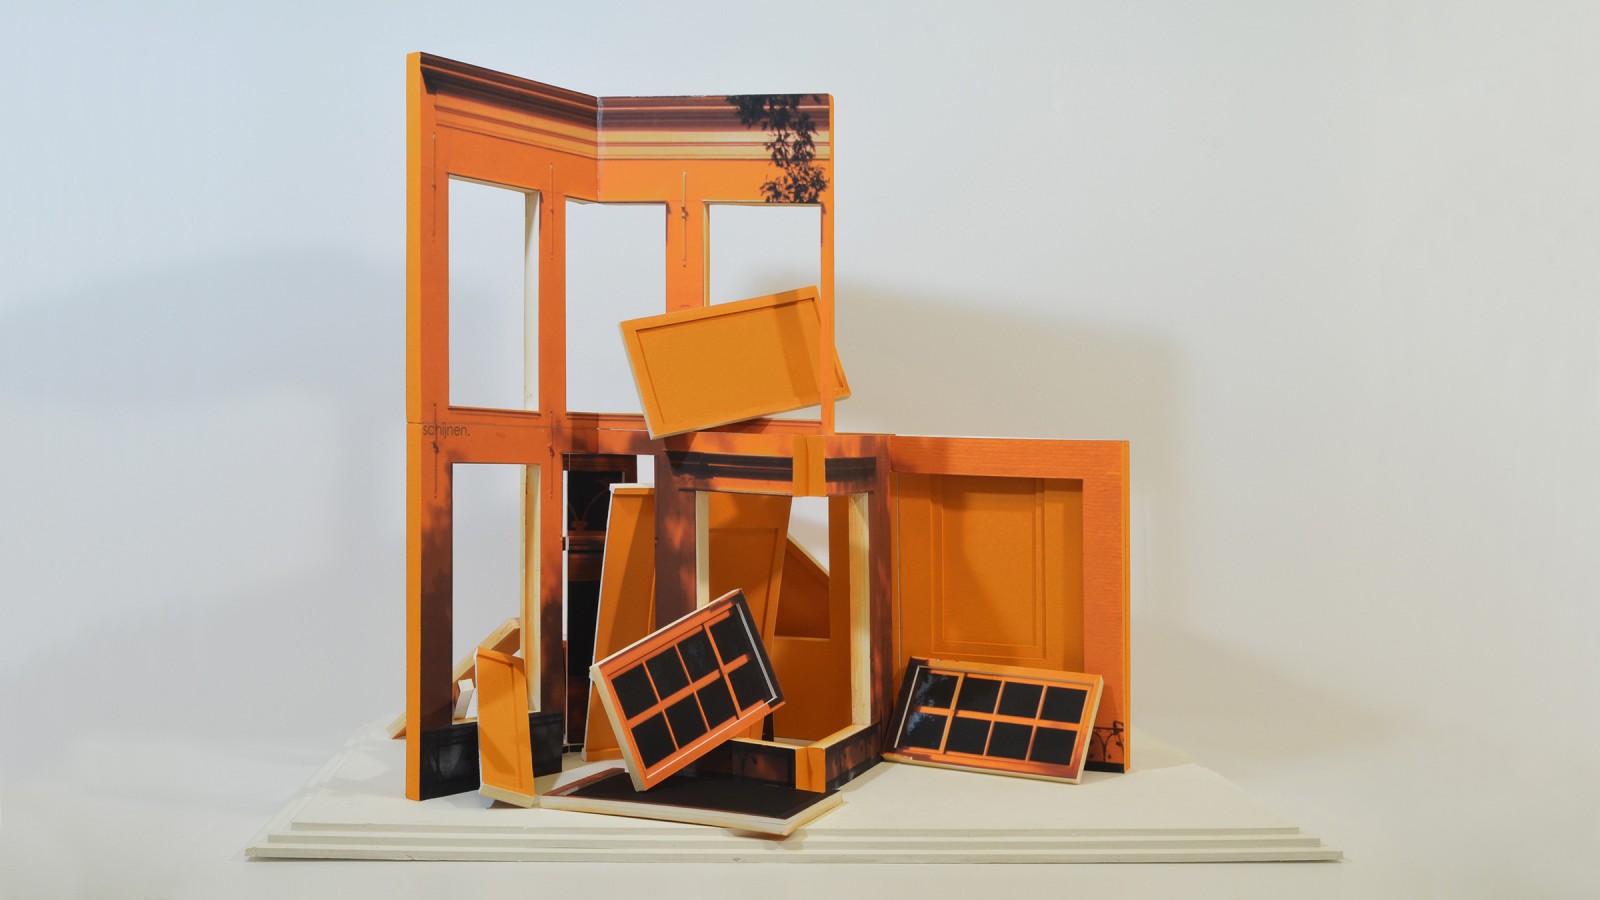 Monument - Folding book 3, 2015.     8 pages each 44,5 x 32 x 2,5 cm. Overall 92,5 x 124 x 80 cm